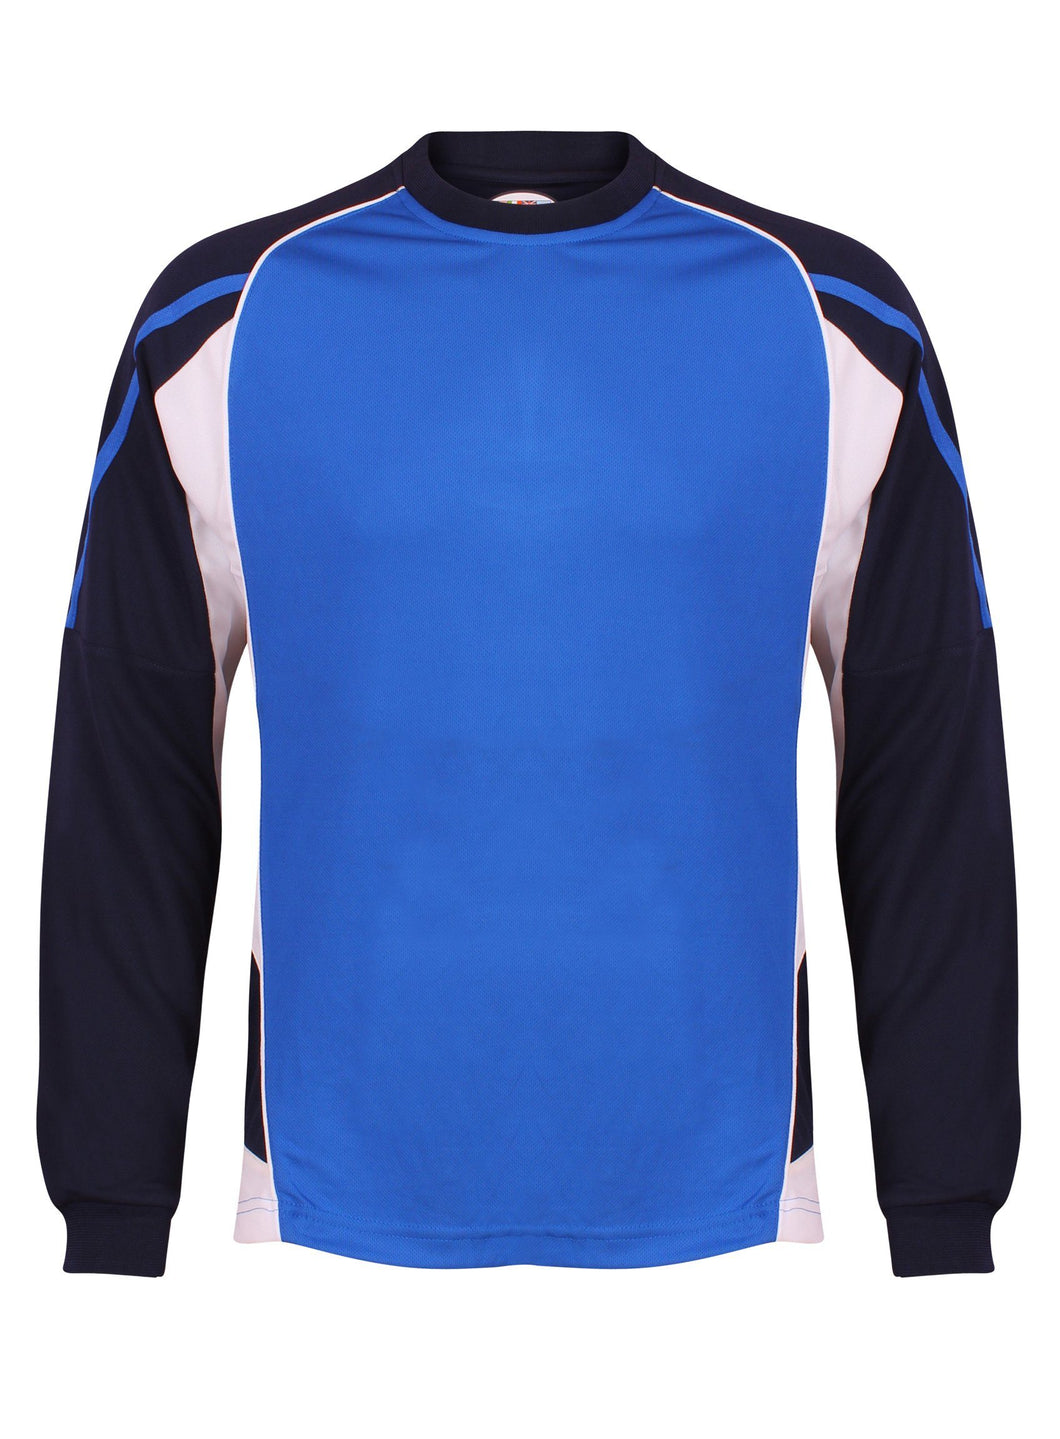 Teamstar Long Sleeve Crew Gazelle Sports UK Yes XS Col A) Royal Blue/ Navy/ White